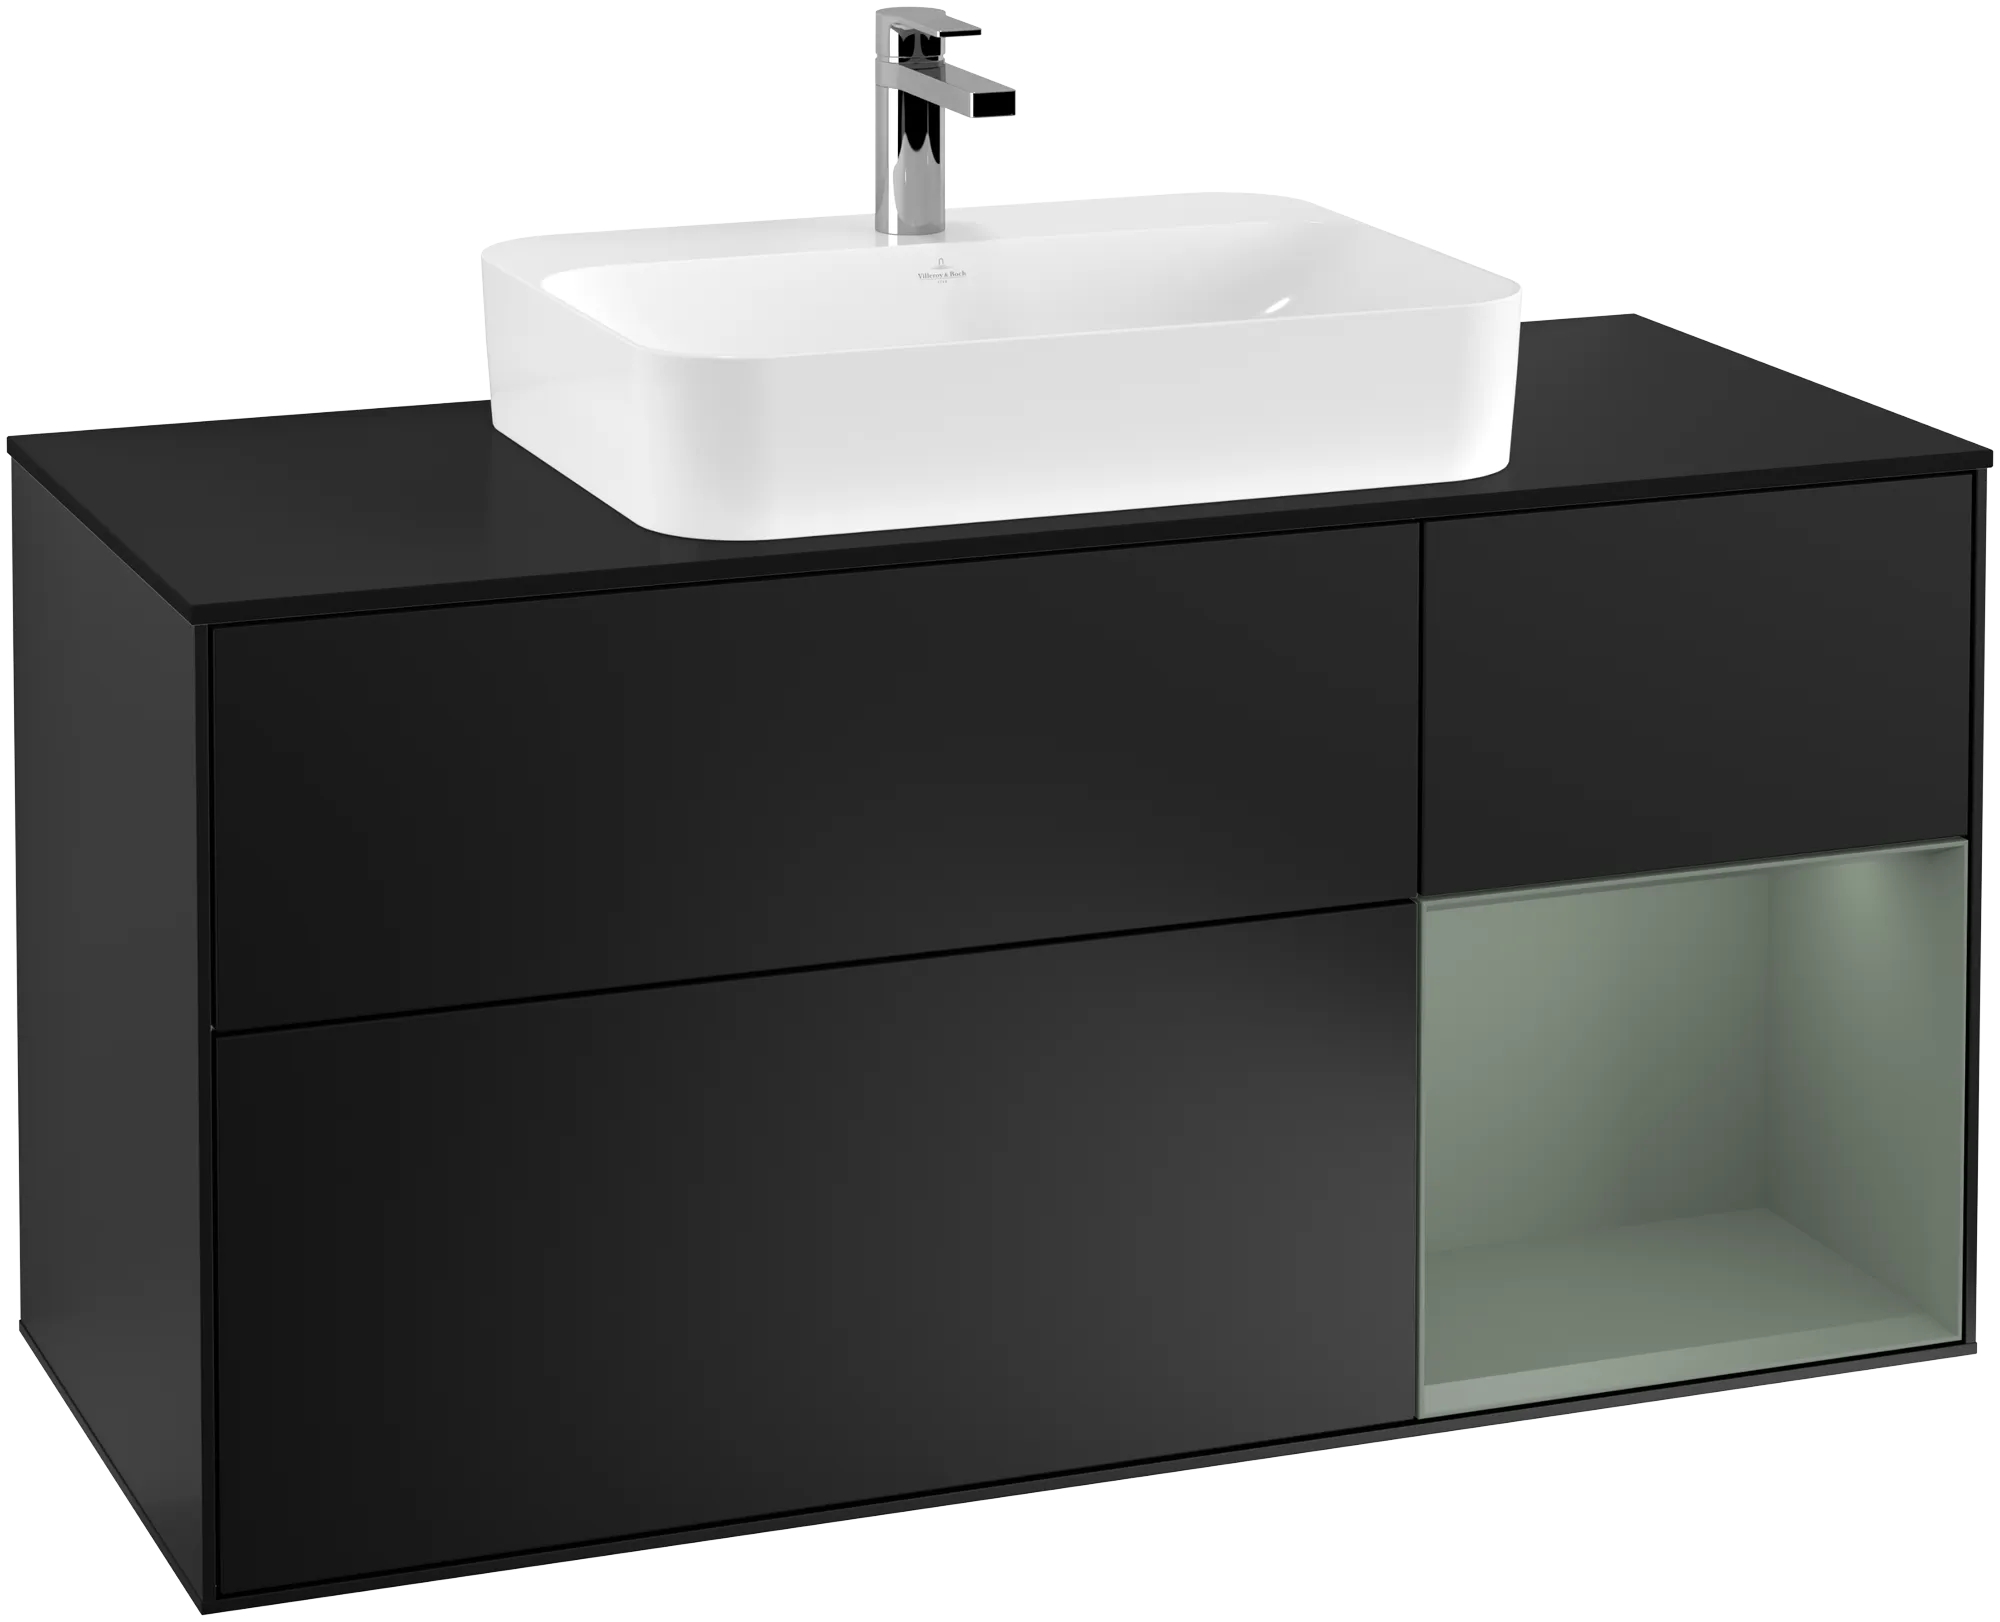 Obrázek VILLEROY BOCH Finion Vanity unit, with lighting, 3 pull-out compartments, 1200 x 603 x 501 mm, Black Matt Lacquer / Olive Matt Lacquer / Glass Black Matt #G422GMPD